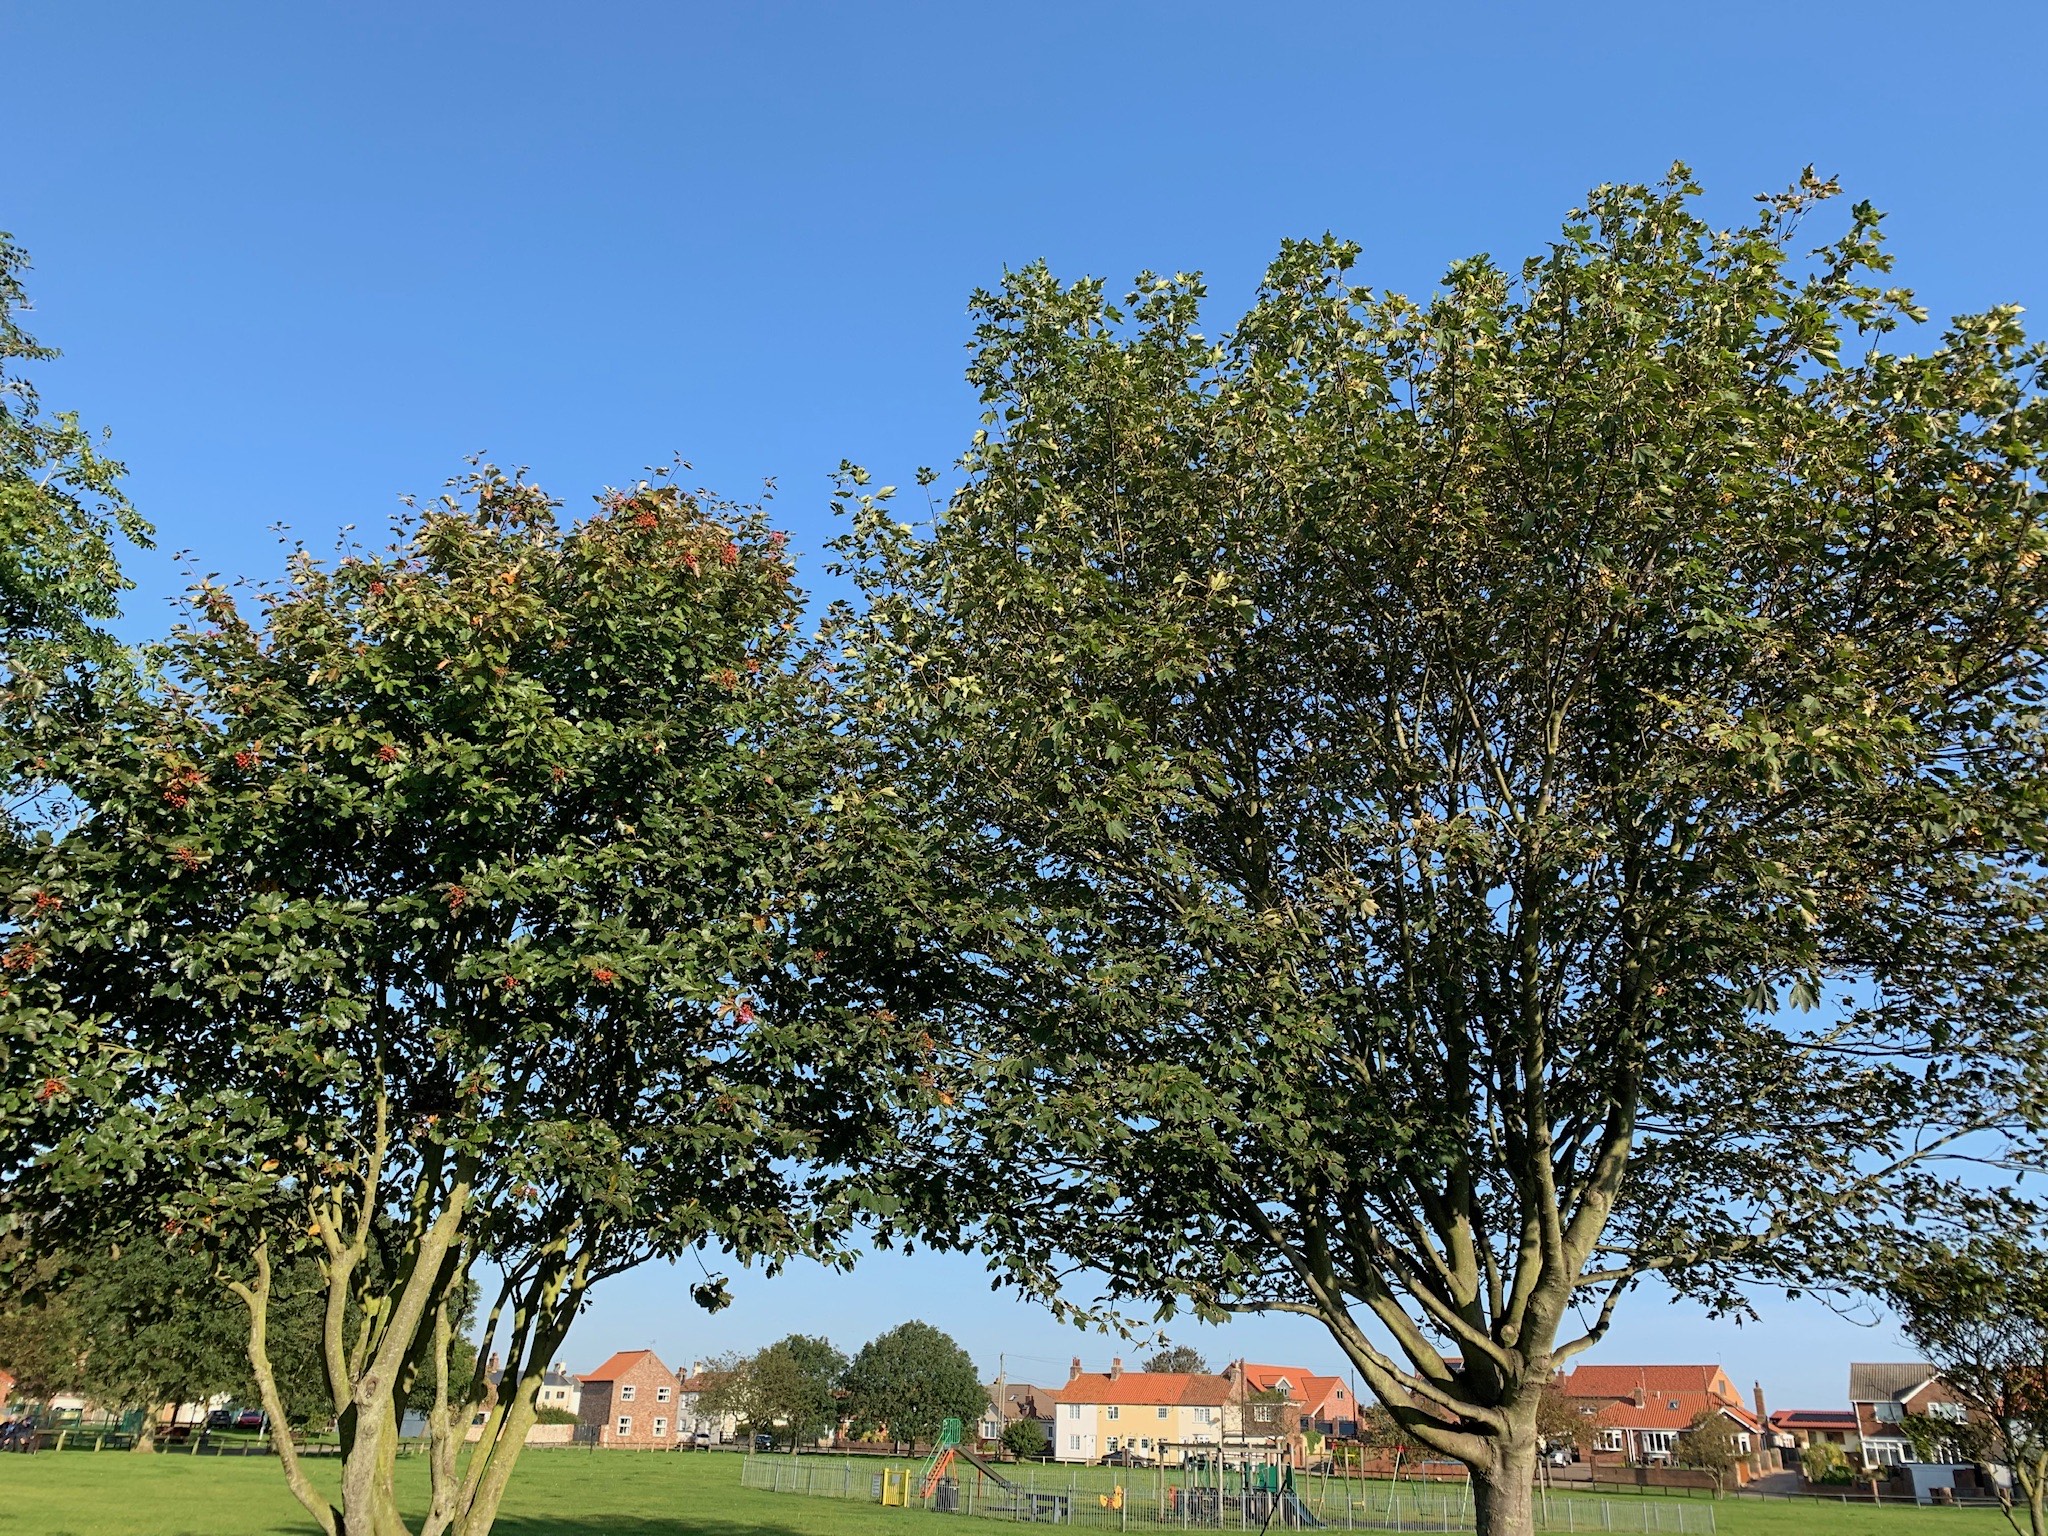 Trees on a village green